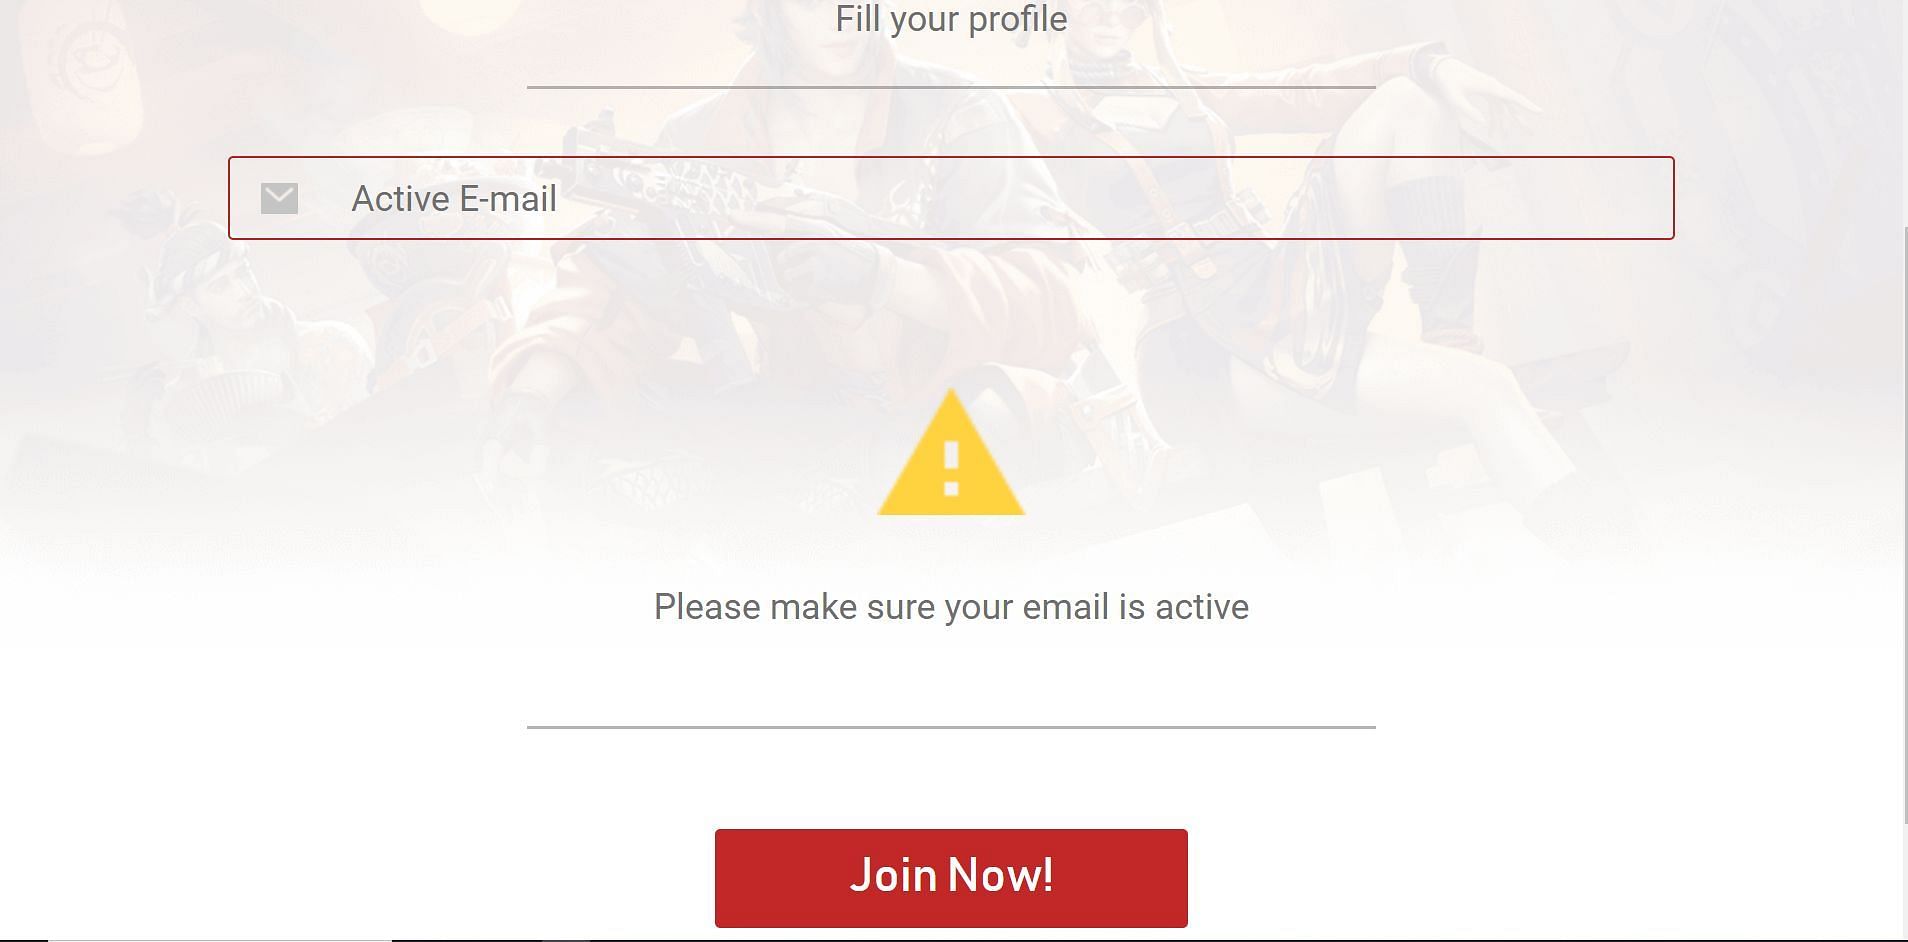 Individuals must provide an active email ID (Image via Garena)